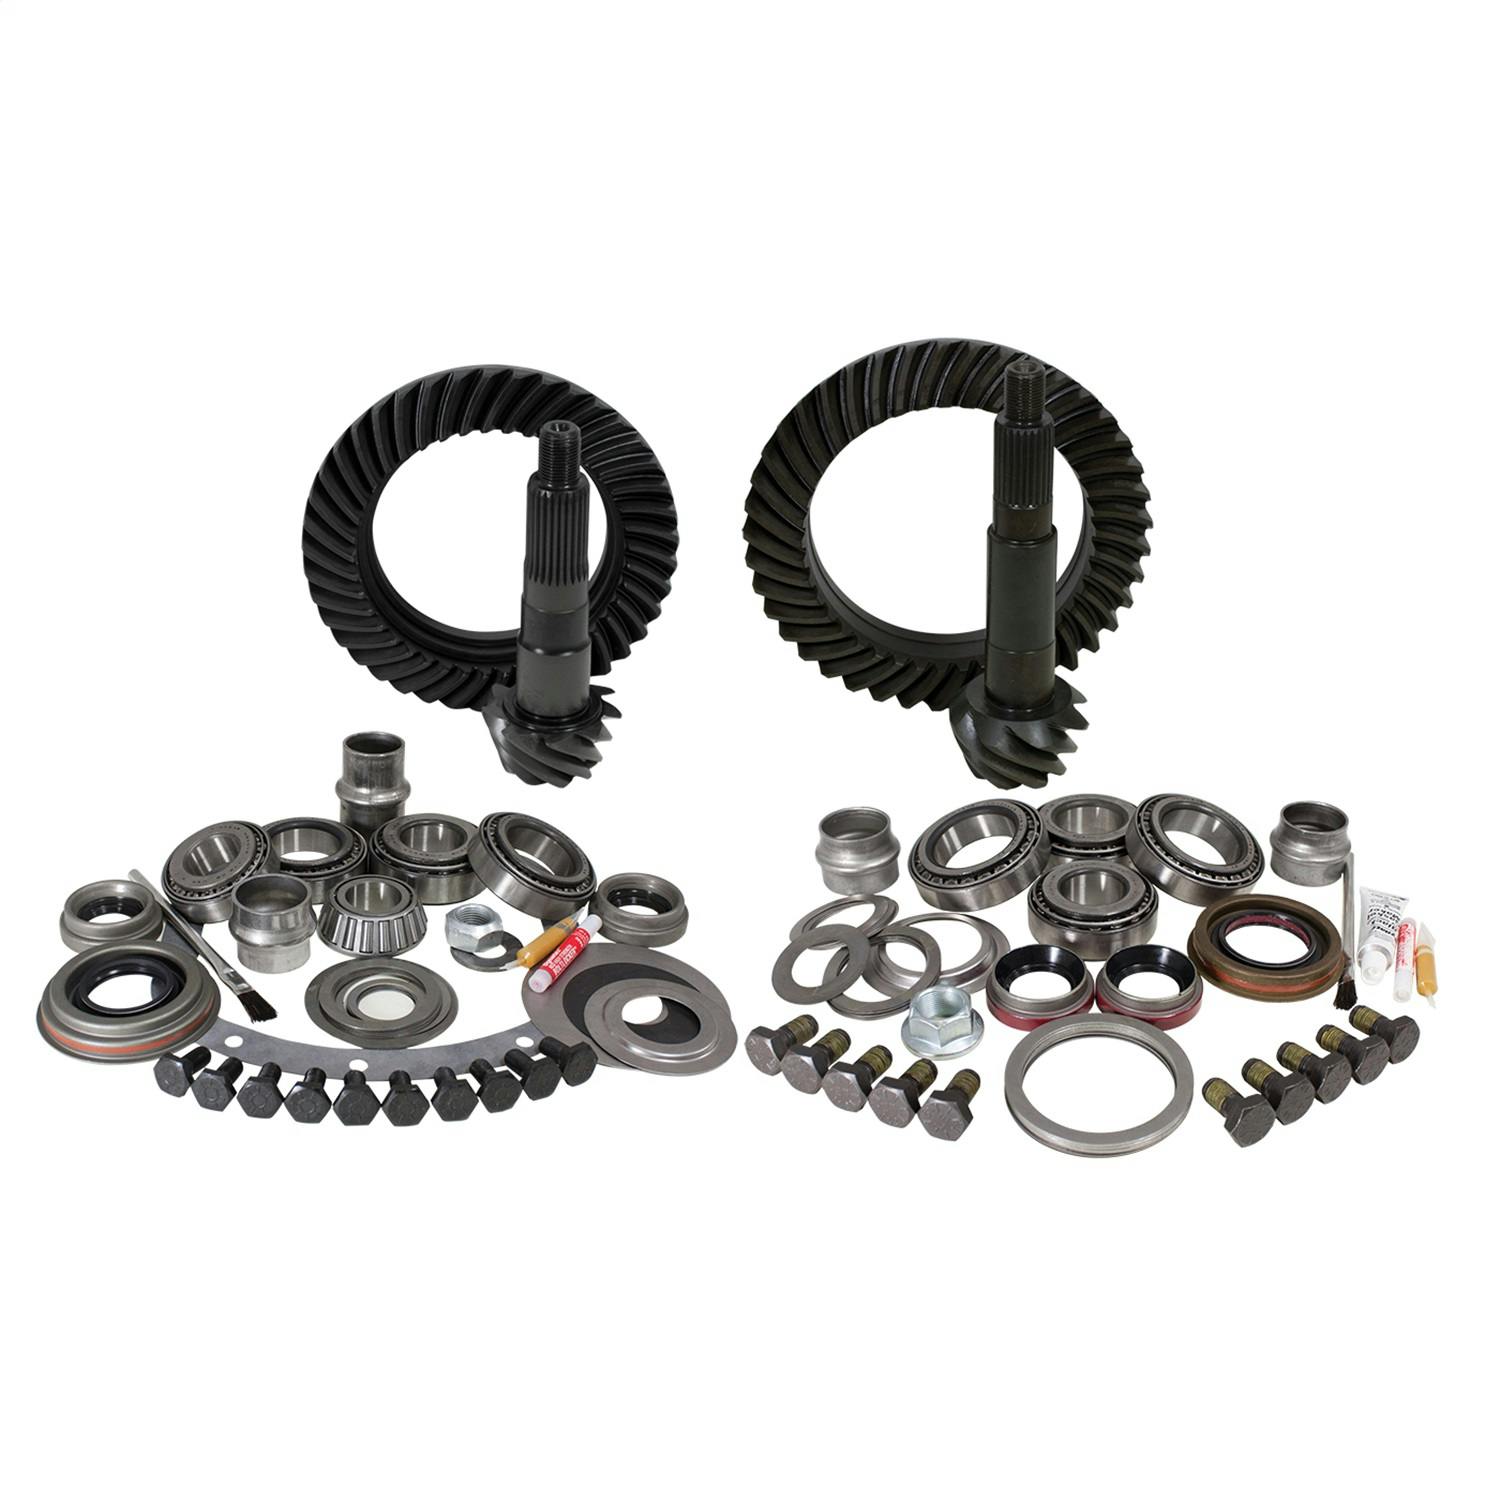 USA Standard Gear ZGK055 Ring And Pinion Set And Complete Install Kit